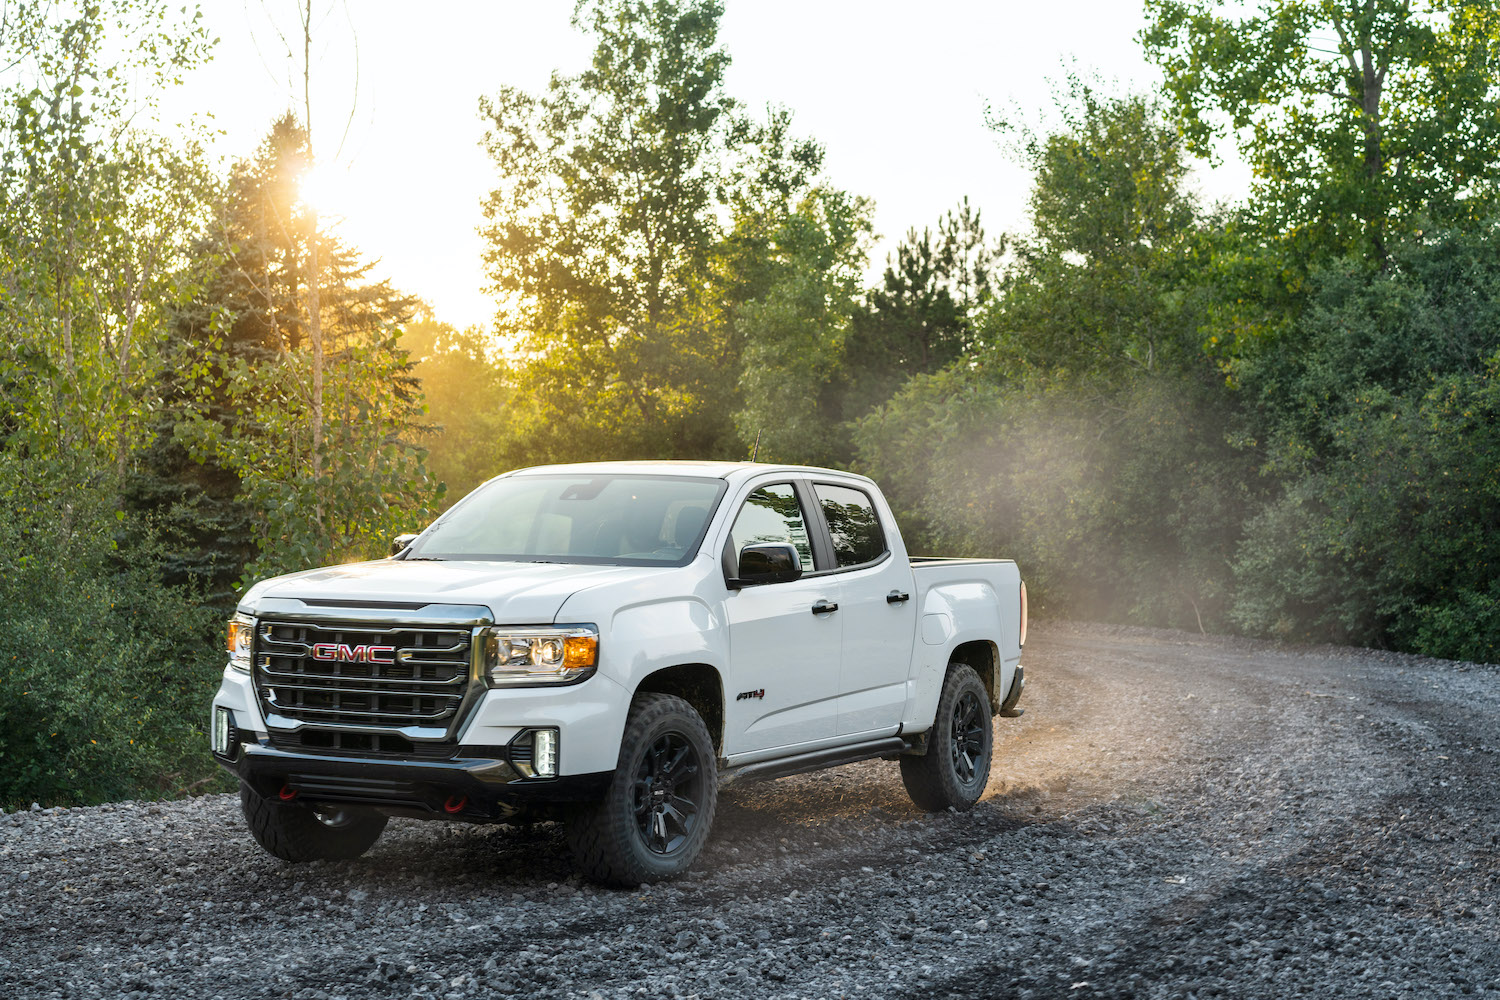 A white 2021 GMC Canyon driving, one of the best trucks for the value according to TrueCar